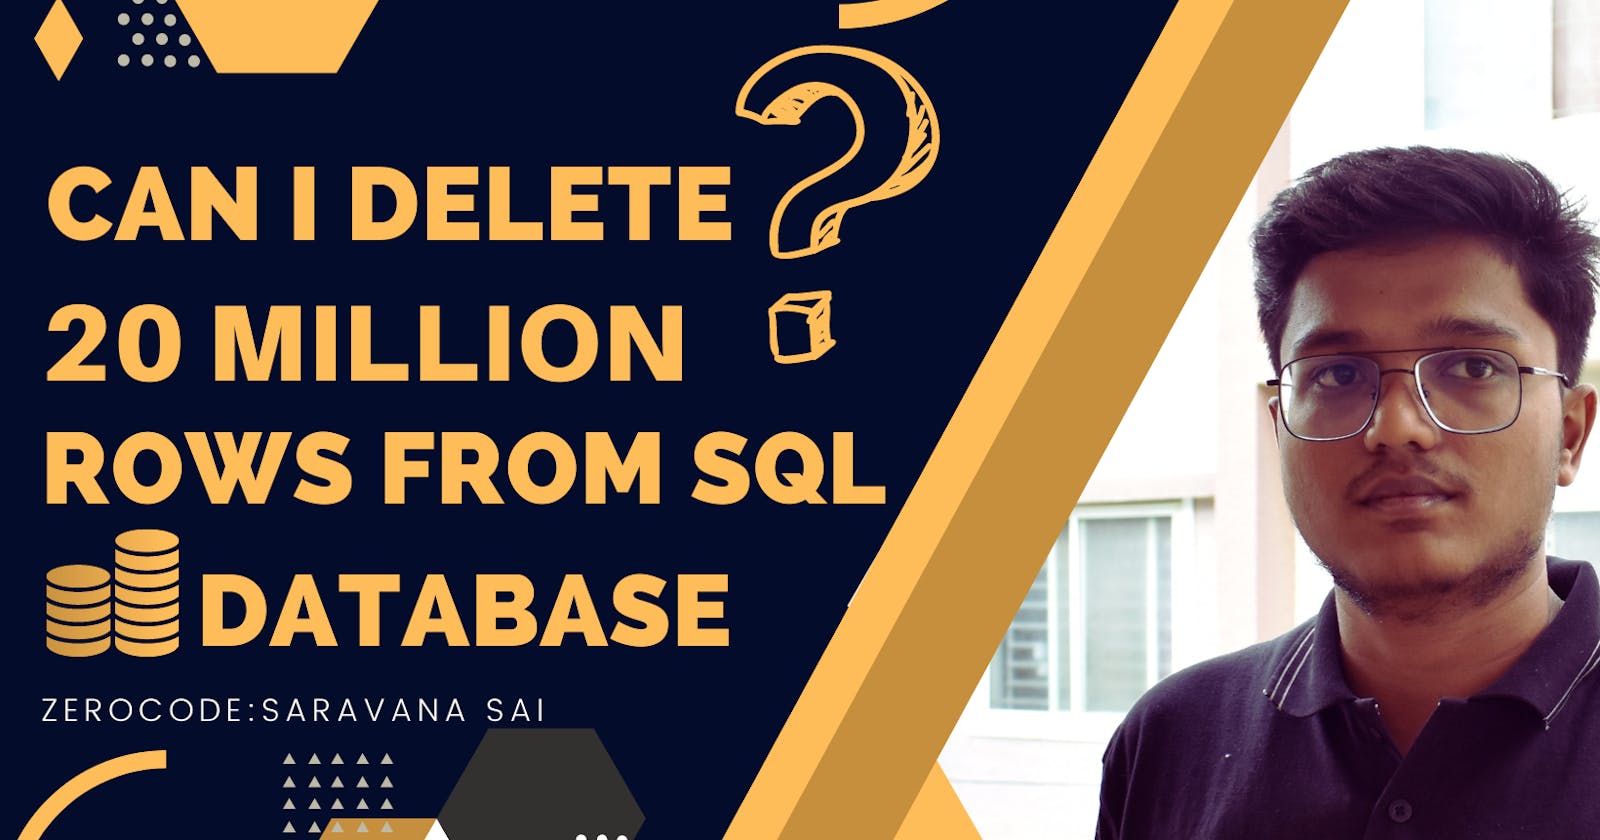 Interesting questions: Can you delete 20 Million Records in SQL?